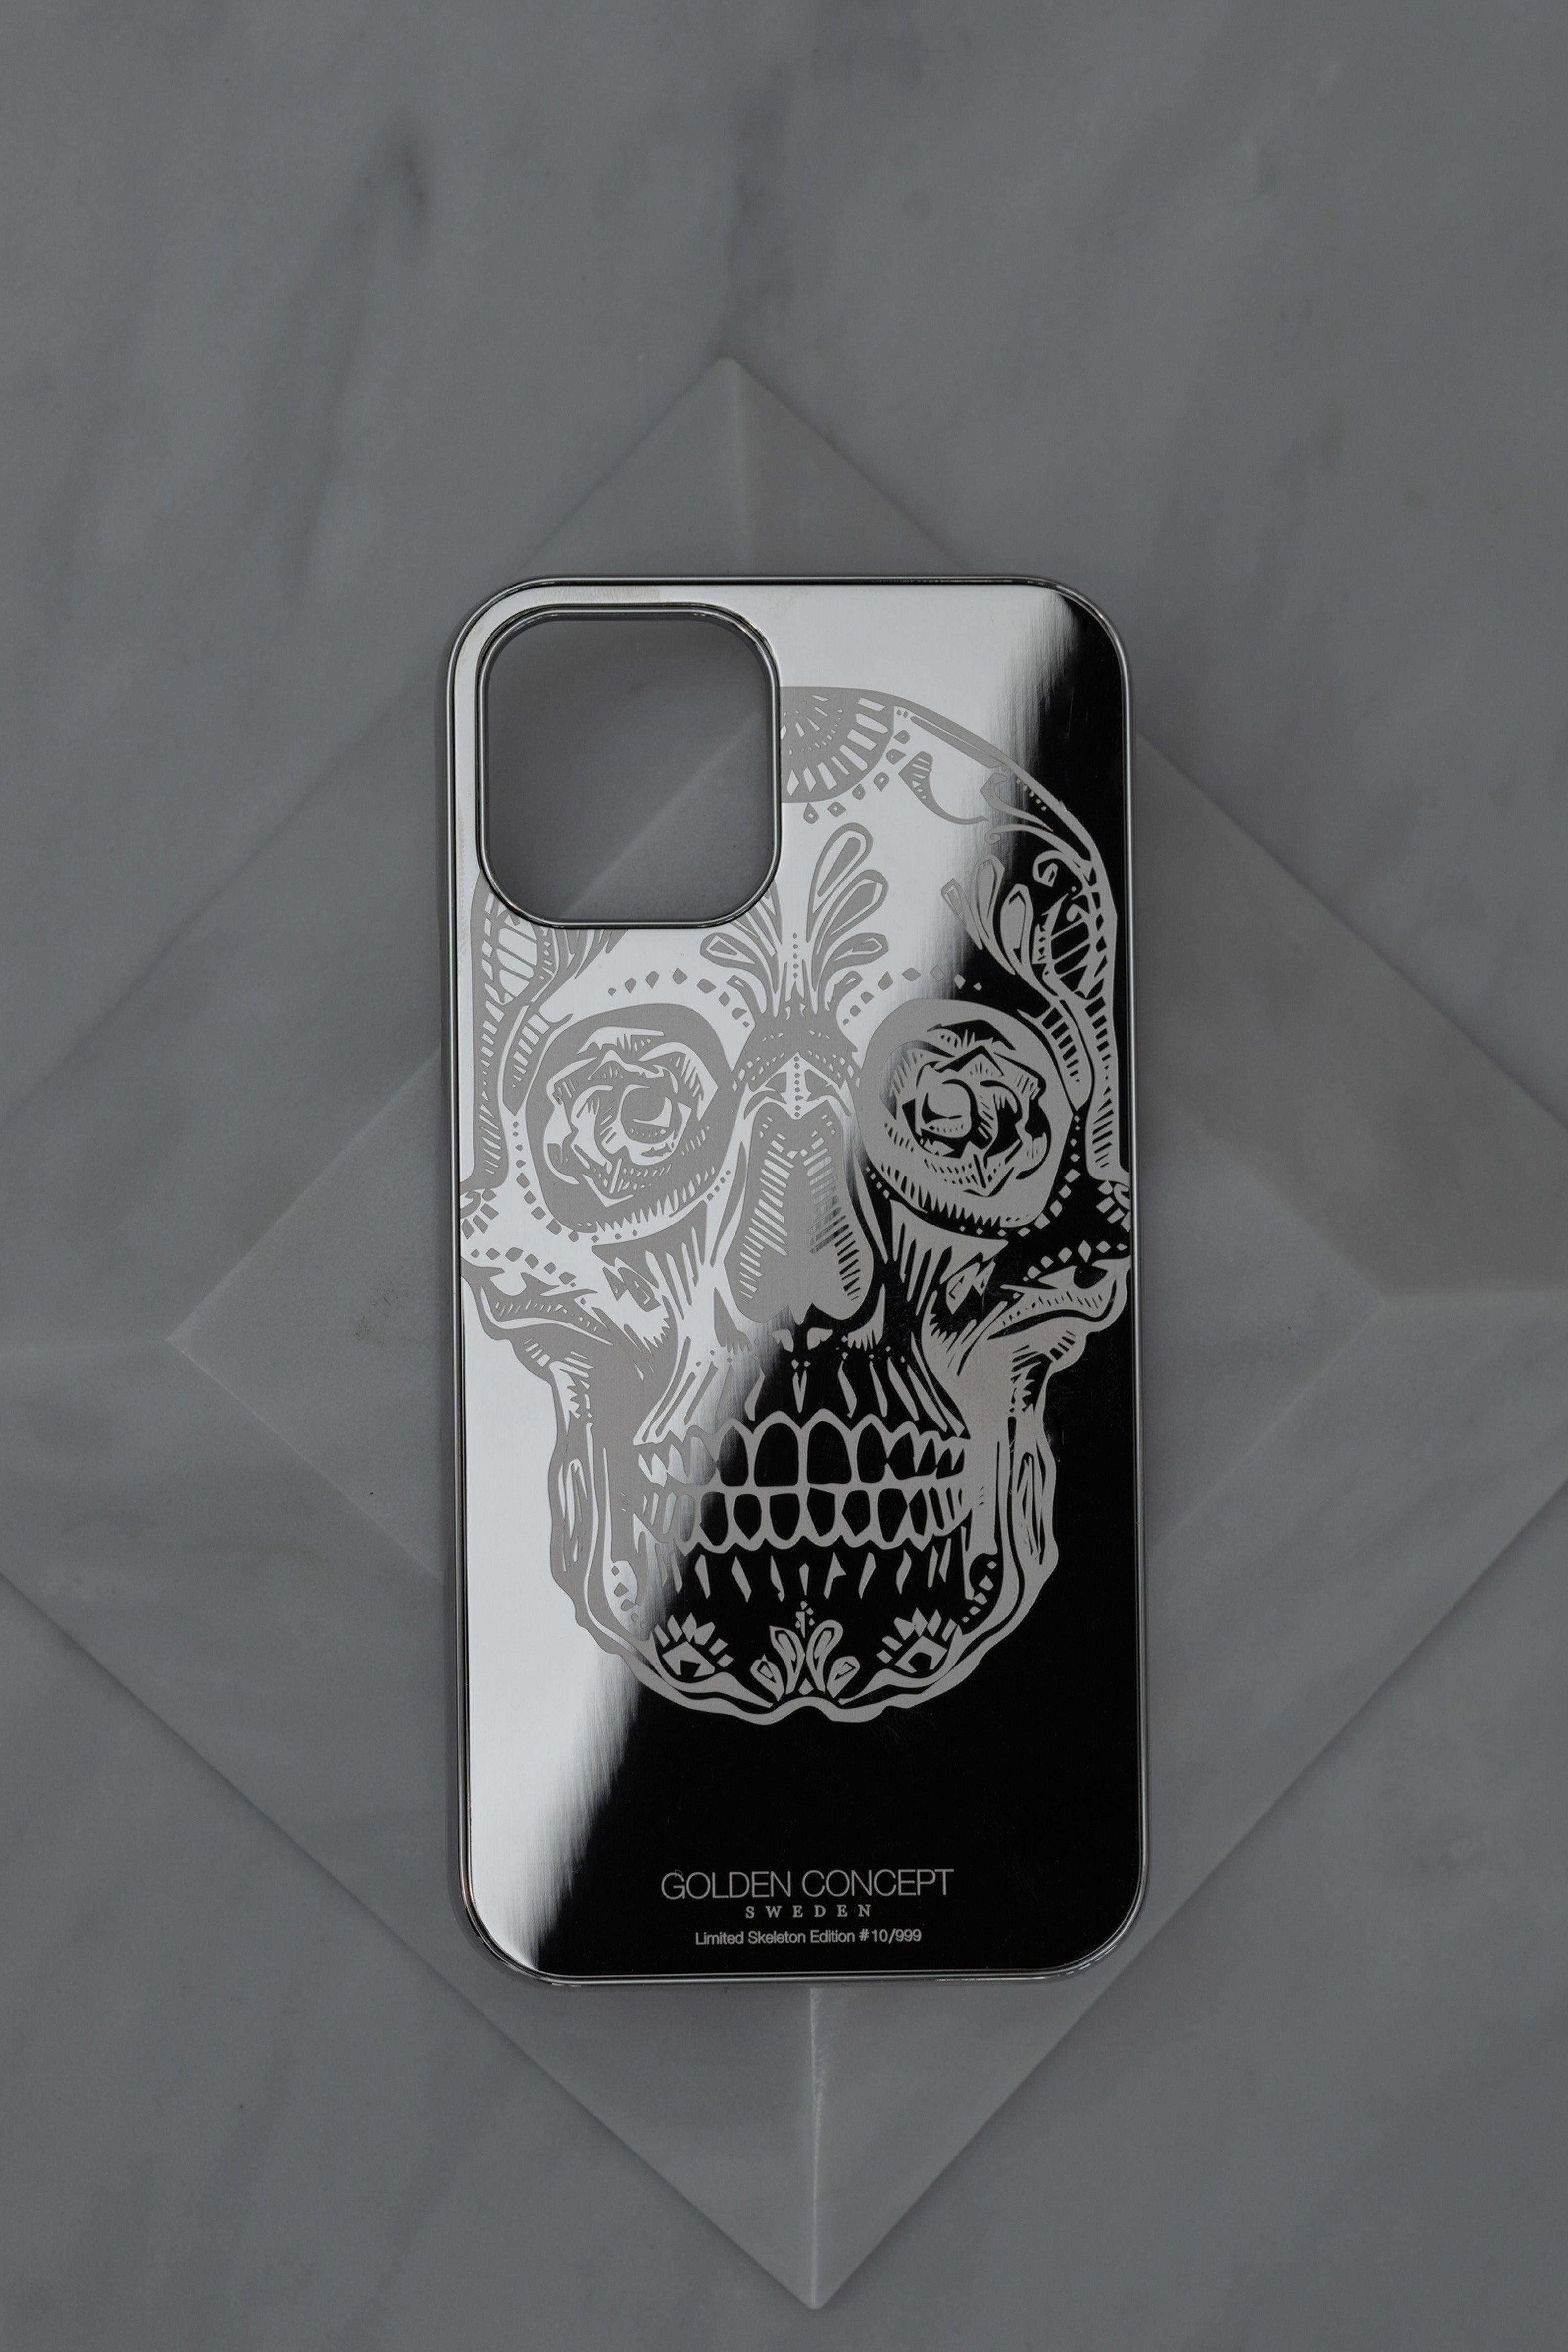 Buy Golden Concept Iphone 12 Pro Max Limited Edition Silver Skeleton Case Online